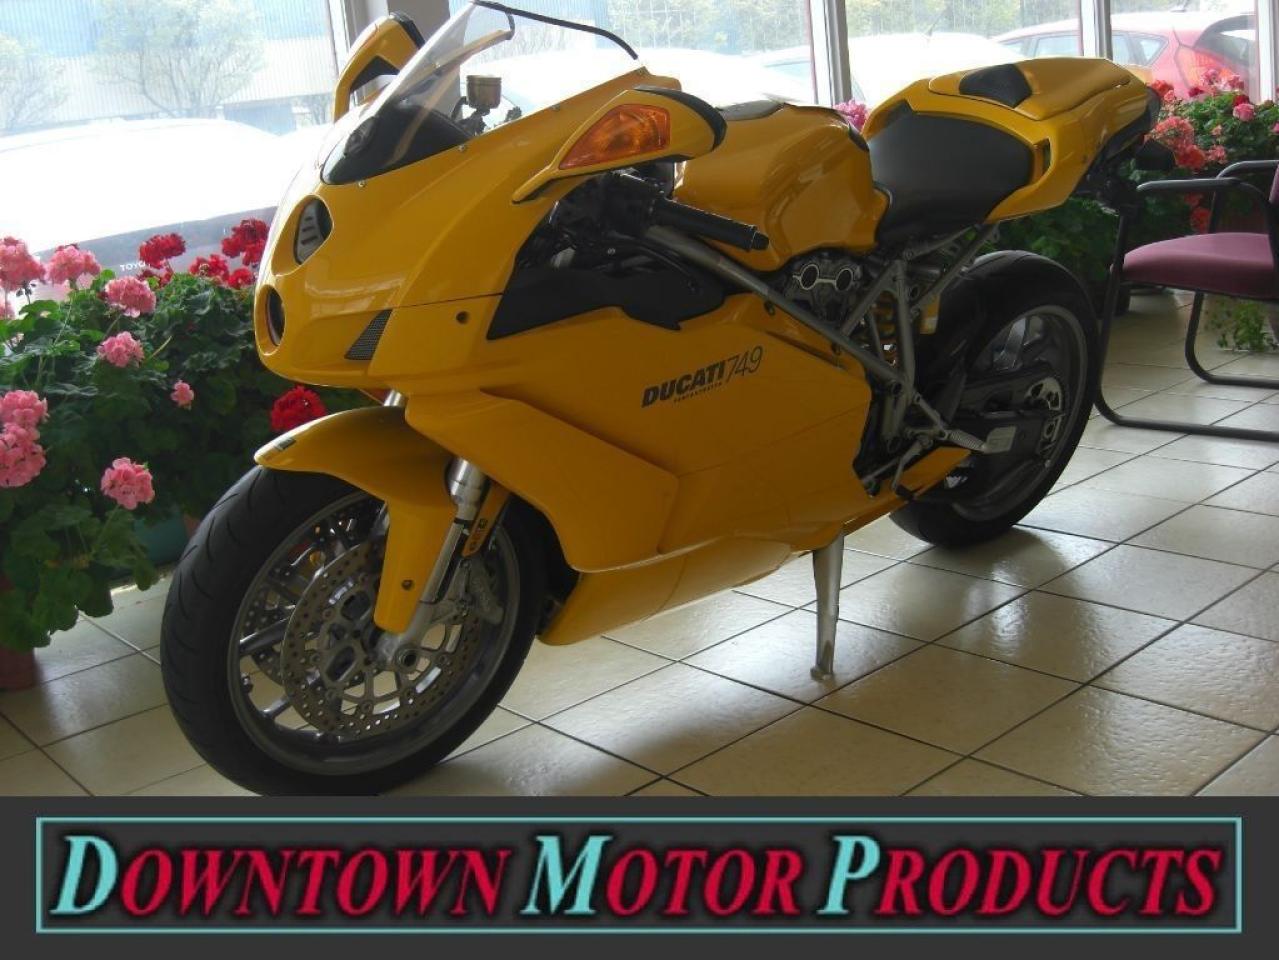 Used 2005 Ducati 749 For Sale In London Ontario Carpages Ca